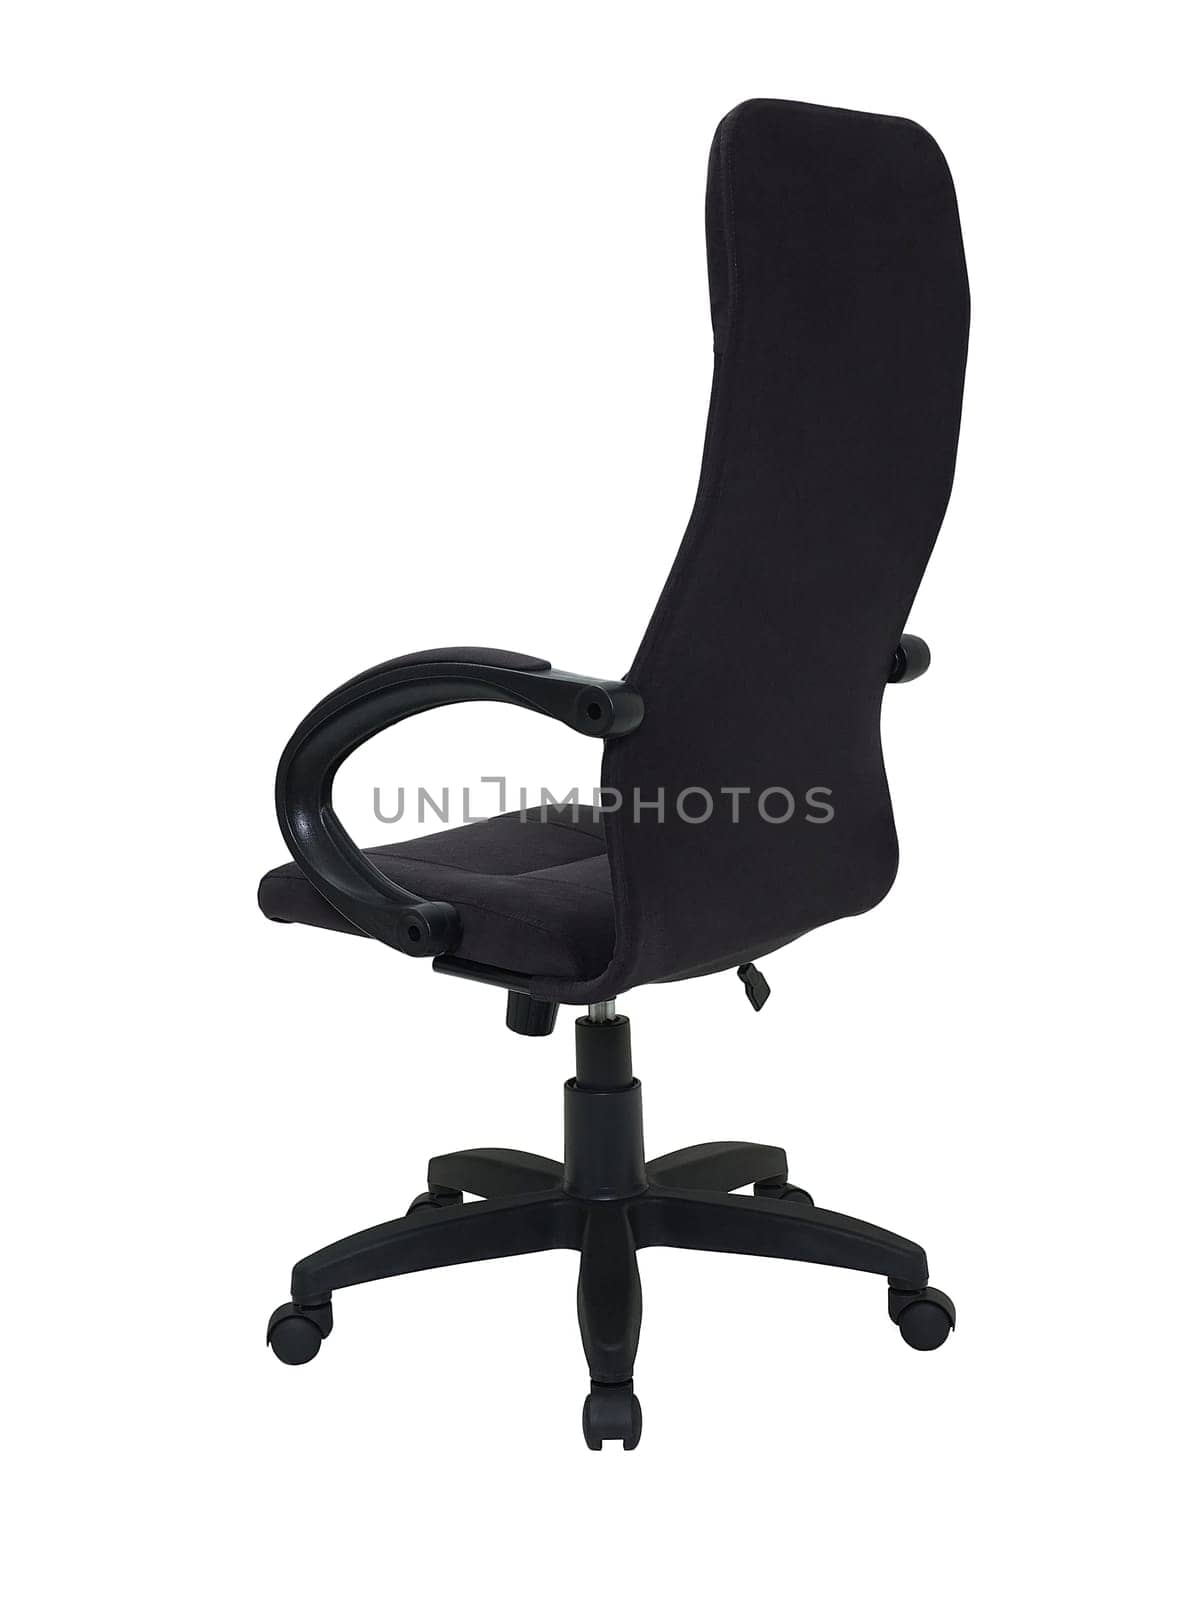 black fabric armchair on wheels isolated on white background, back view. modern furniture in minimal style, interior, home design